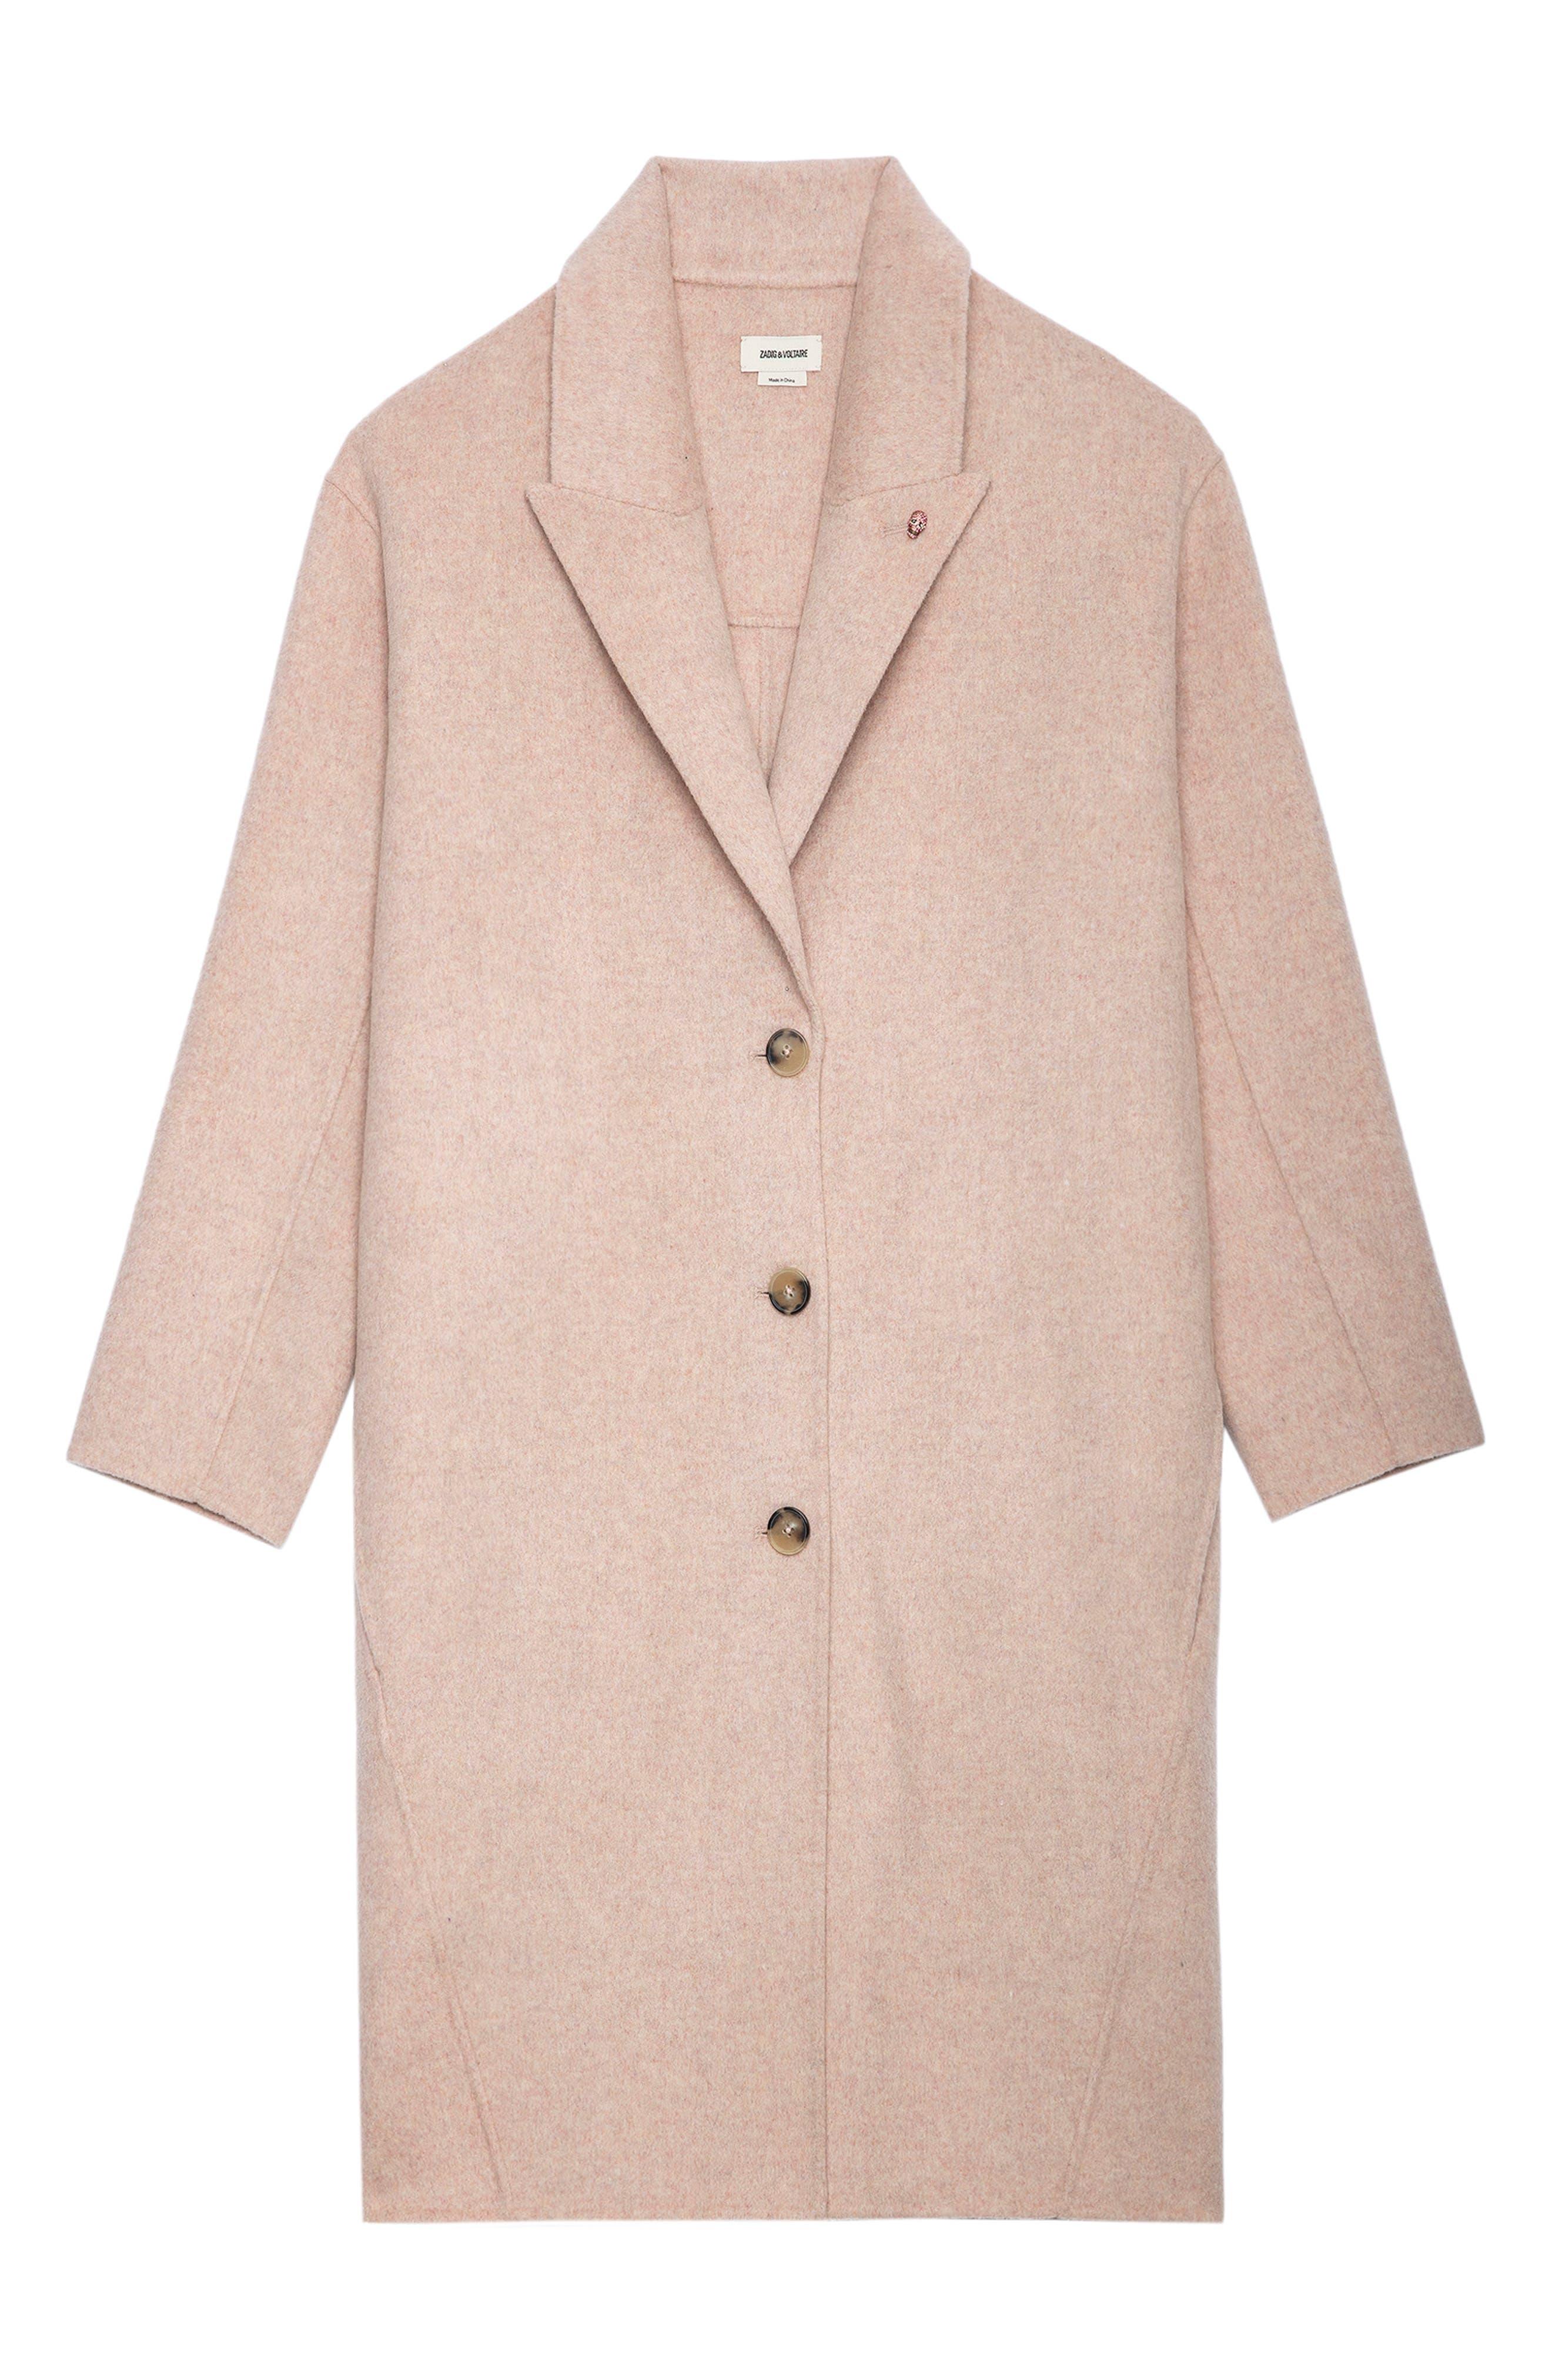 Zadig & Voltaire Mady Wool & Cashmere Blend Coat in Natural | Lyst